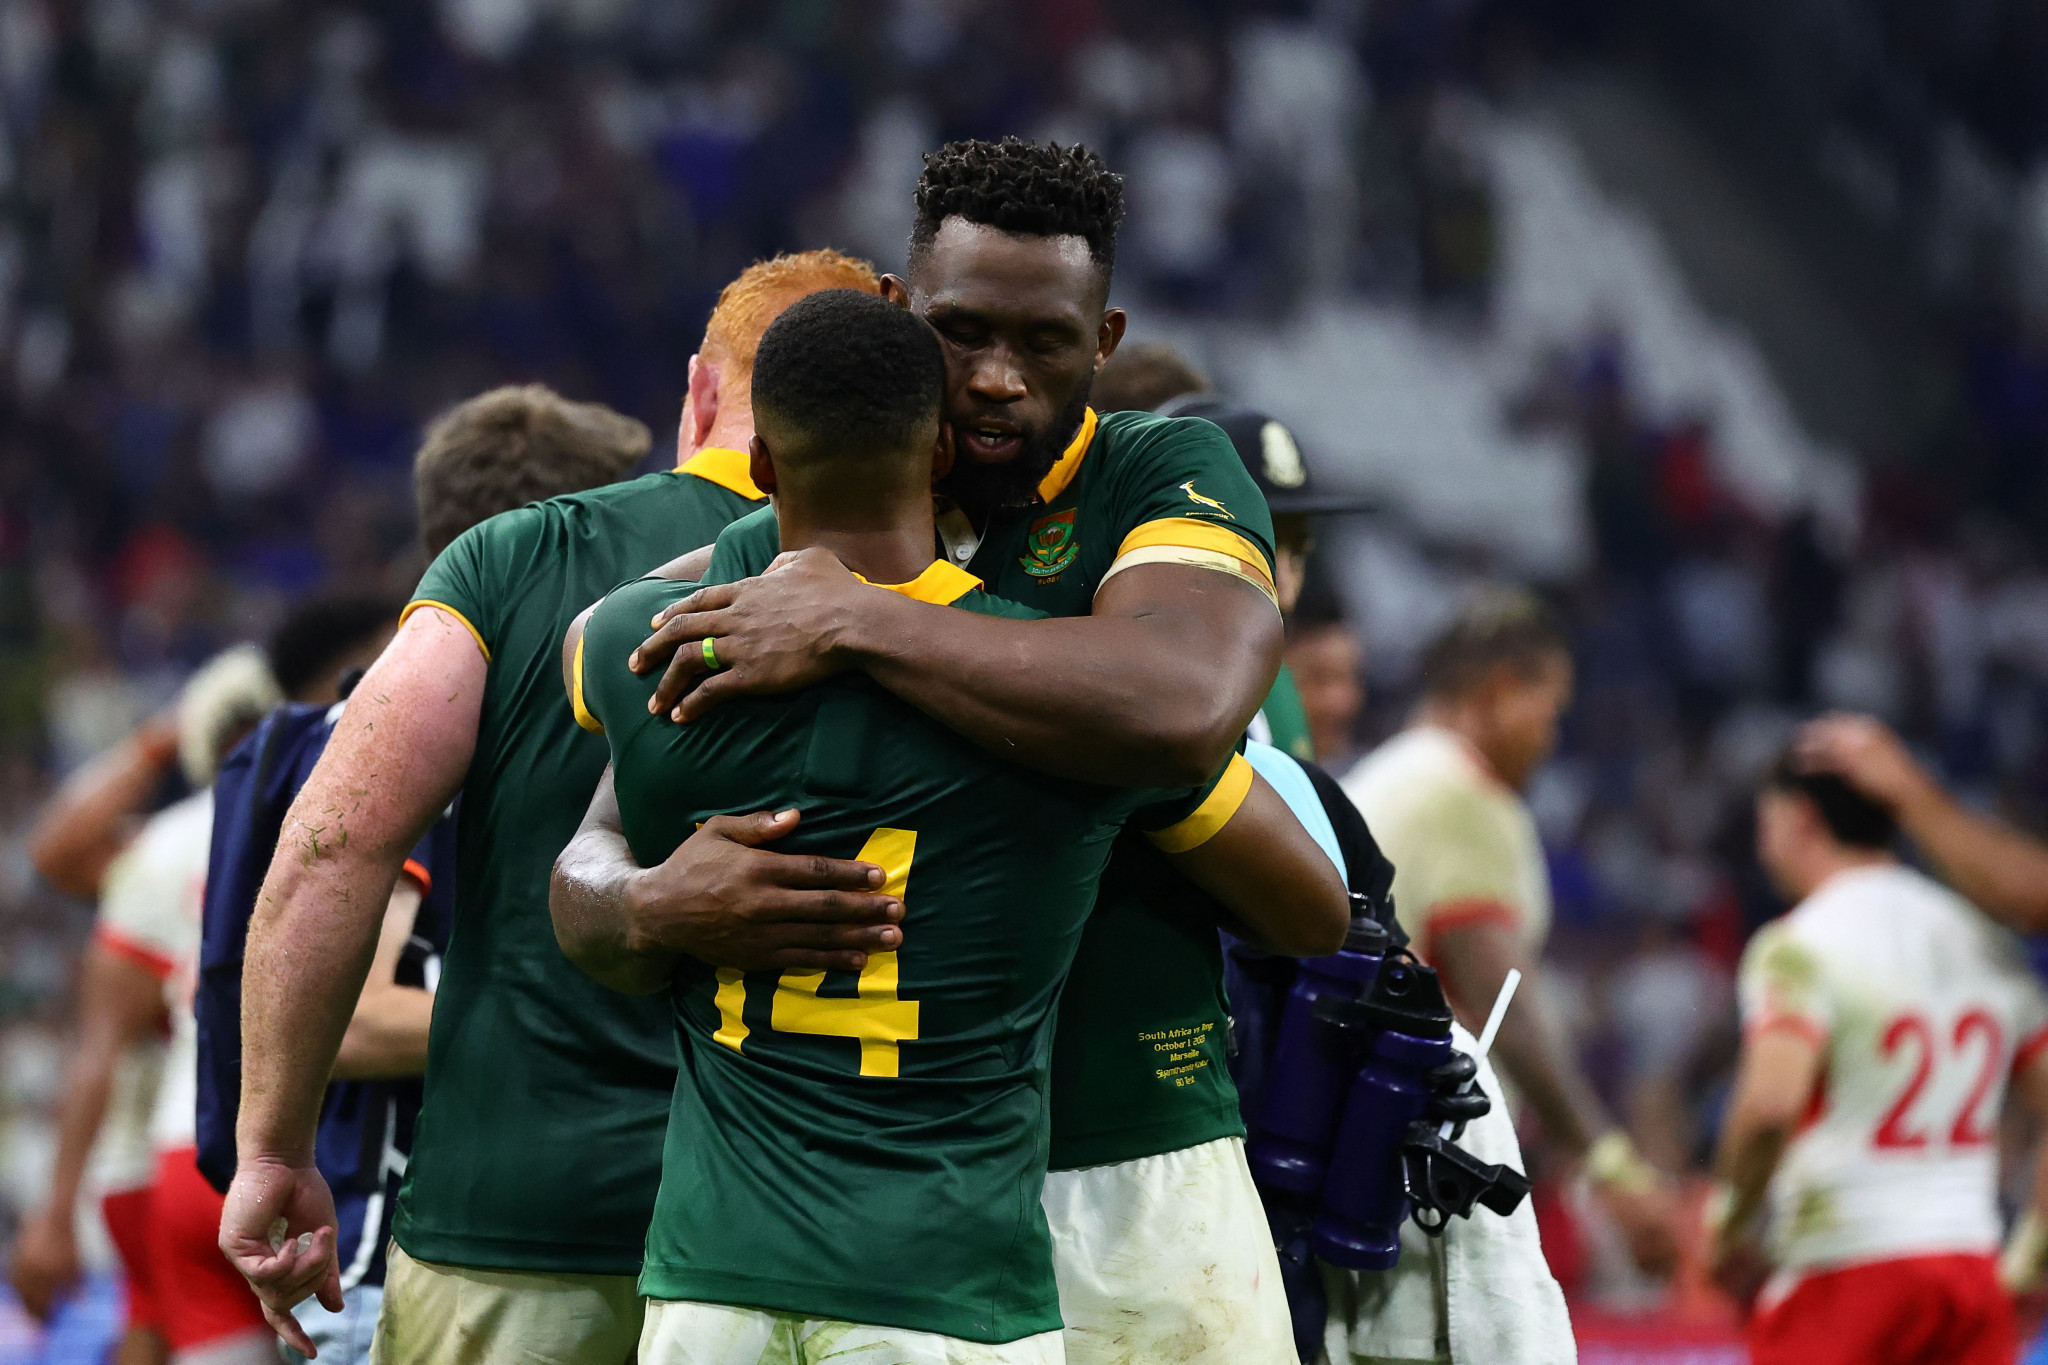 Holders South Africa all-but seal Rugby World Cup quarter-final place with win against Tonga